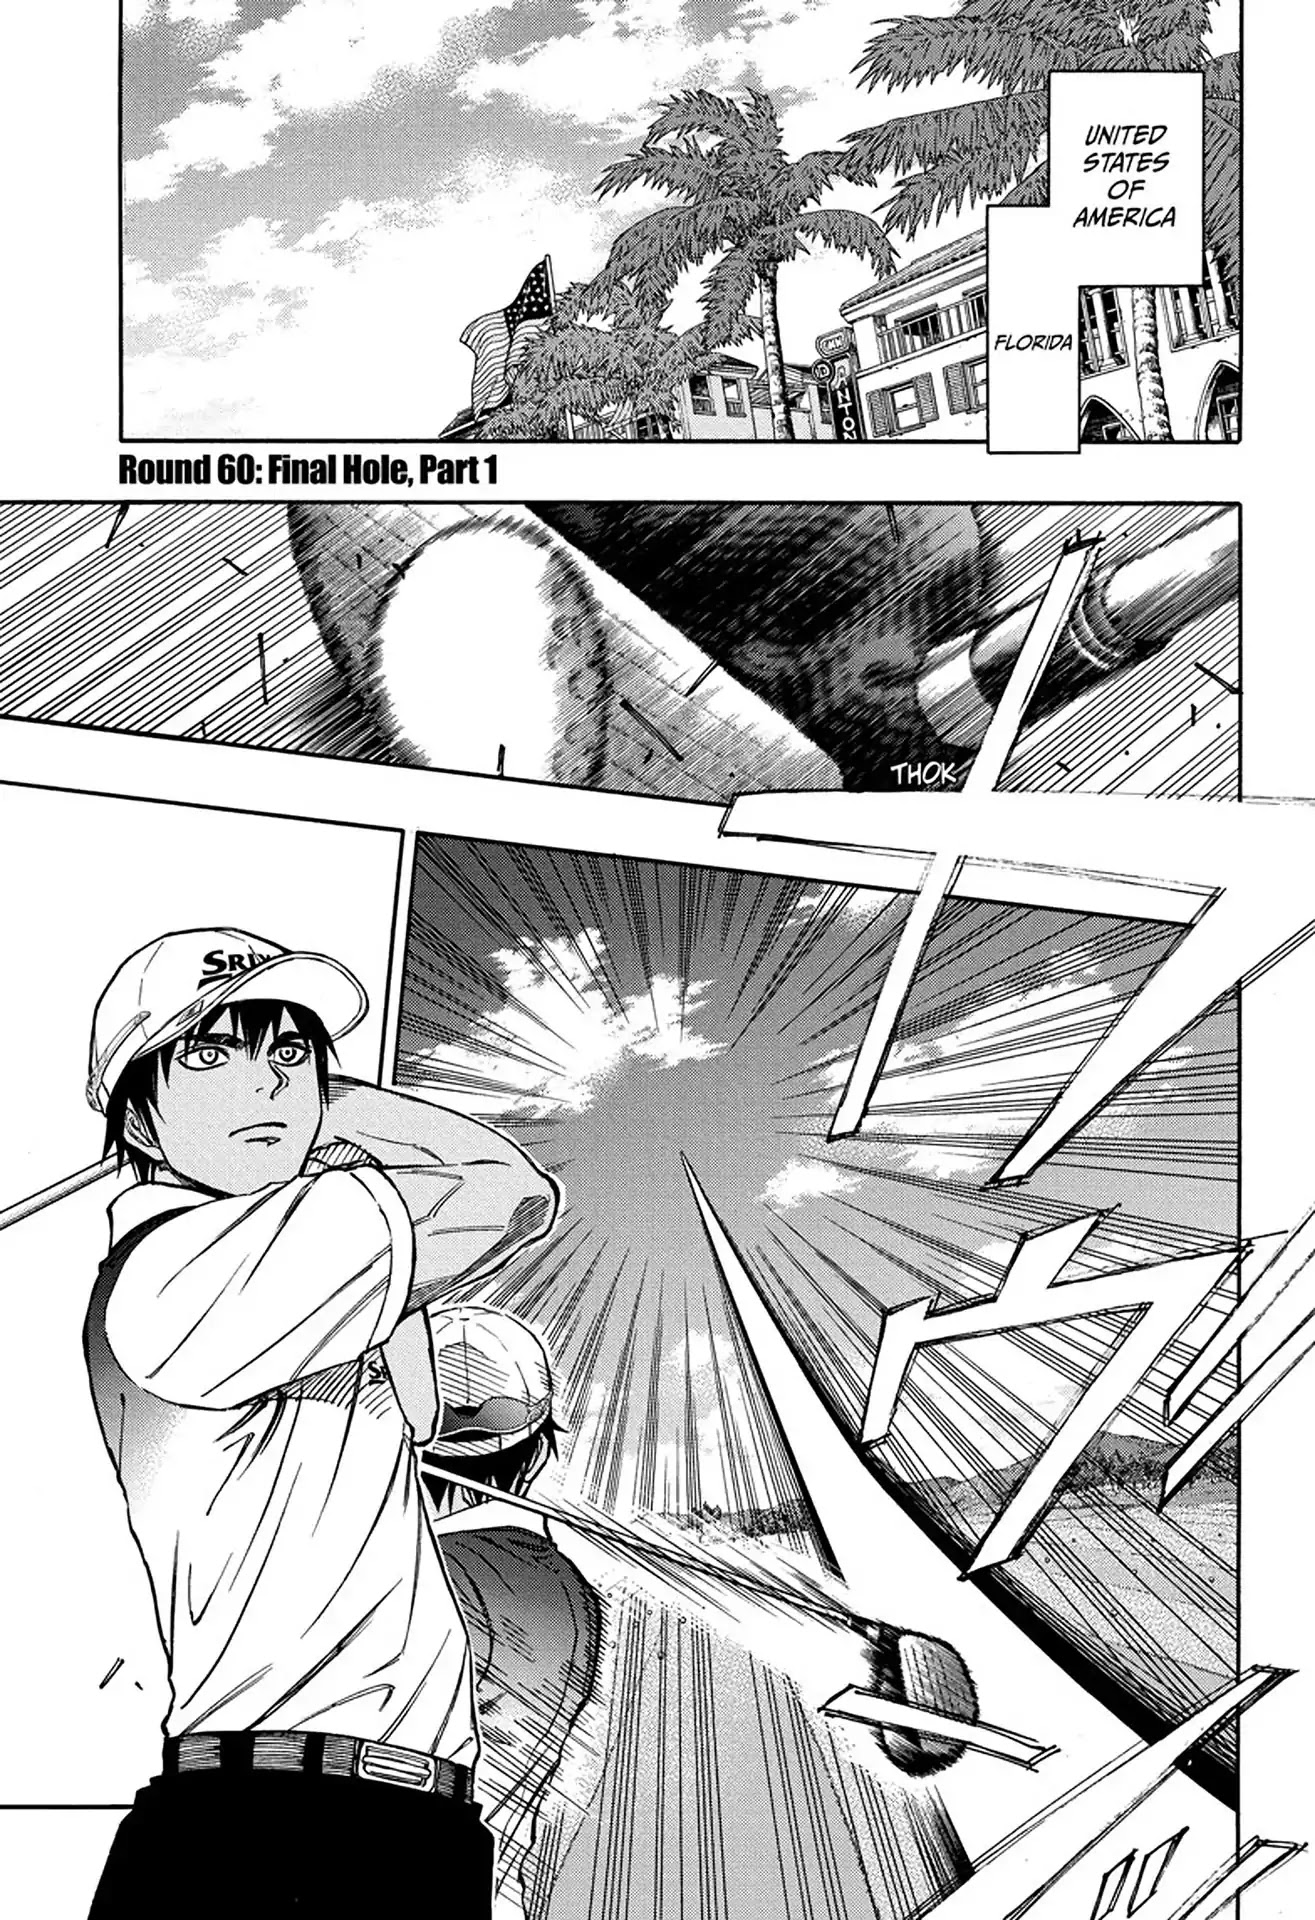 Robot X Laserbeam - Page 2